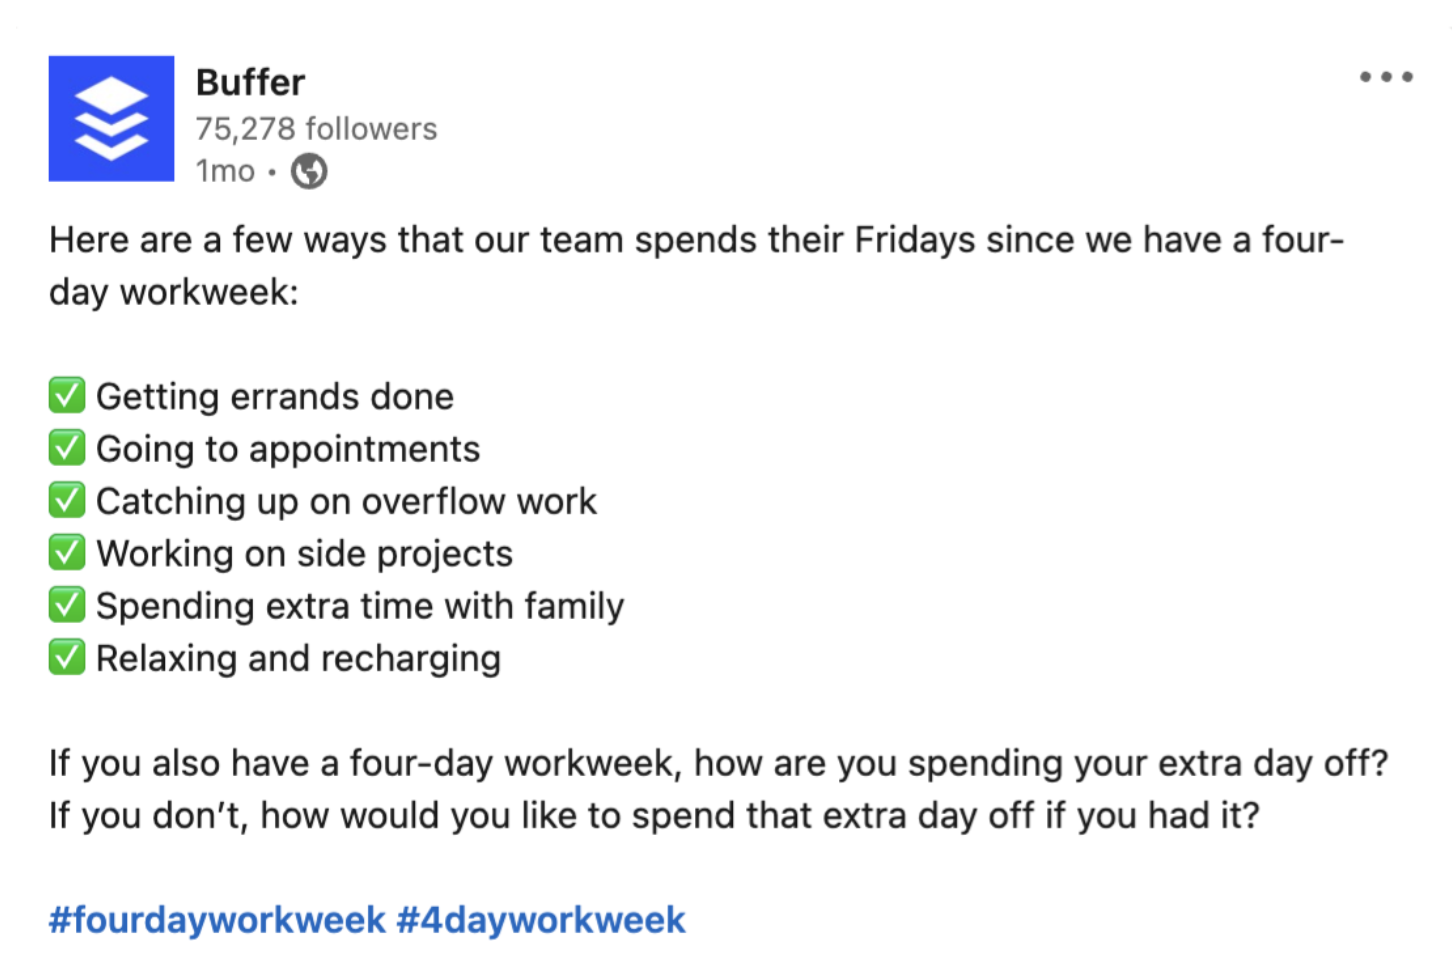 Buffer's post on LinkedIn about how their team spends their Fridays since they have a four-day workweek